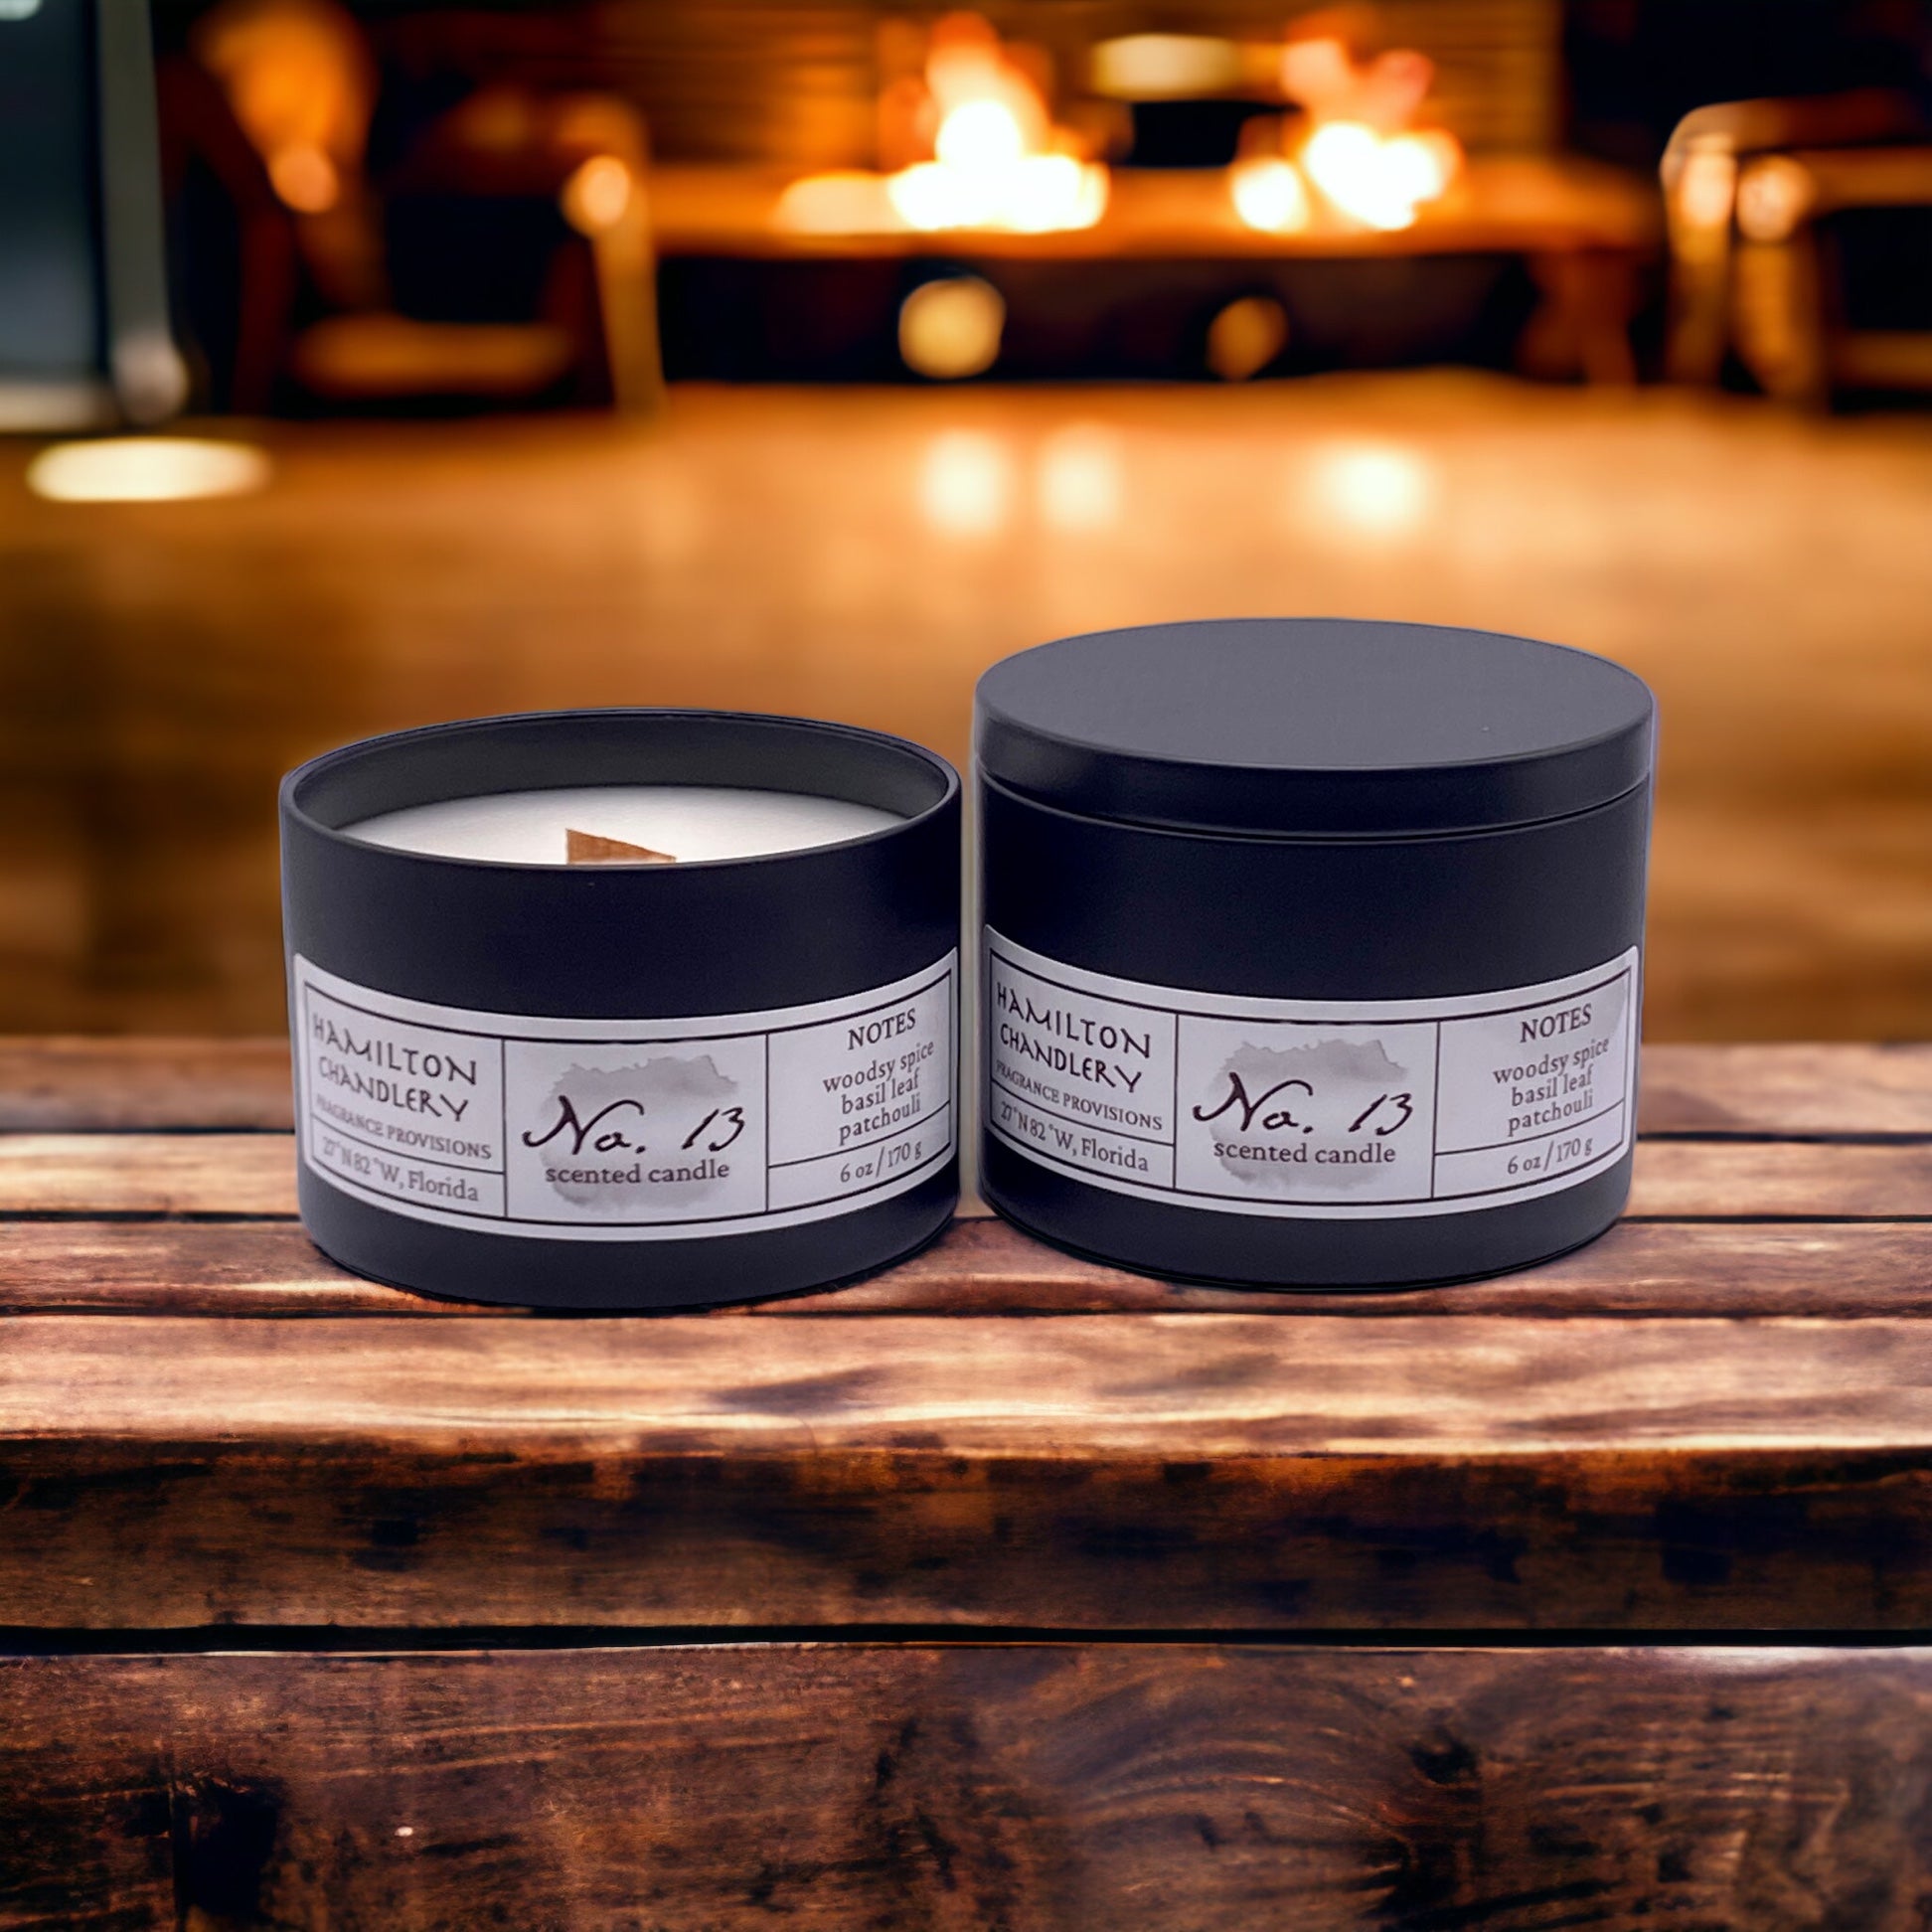 Fragrance No. 13 Travel Tin Candles in Cabin Setting | Hamilton Chandlery